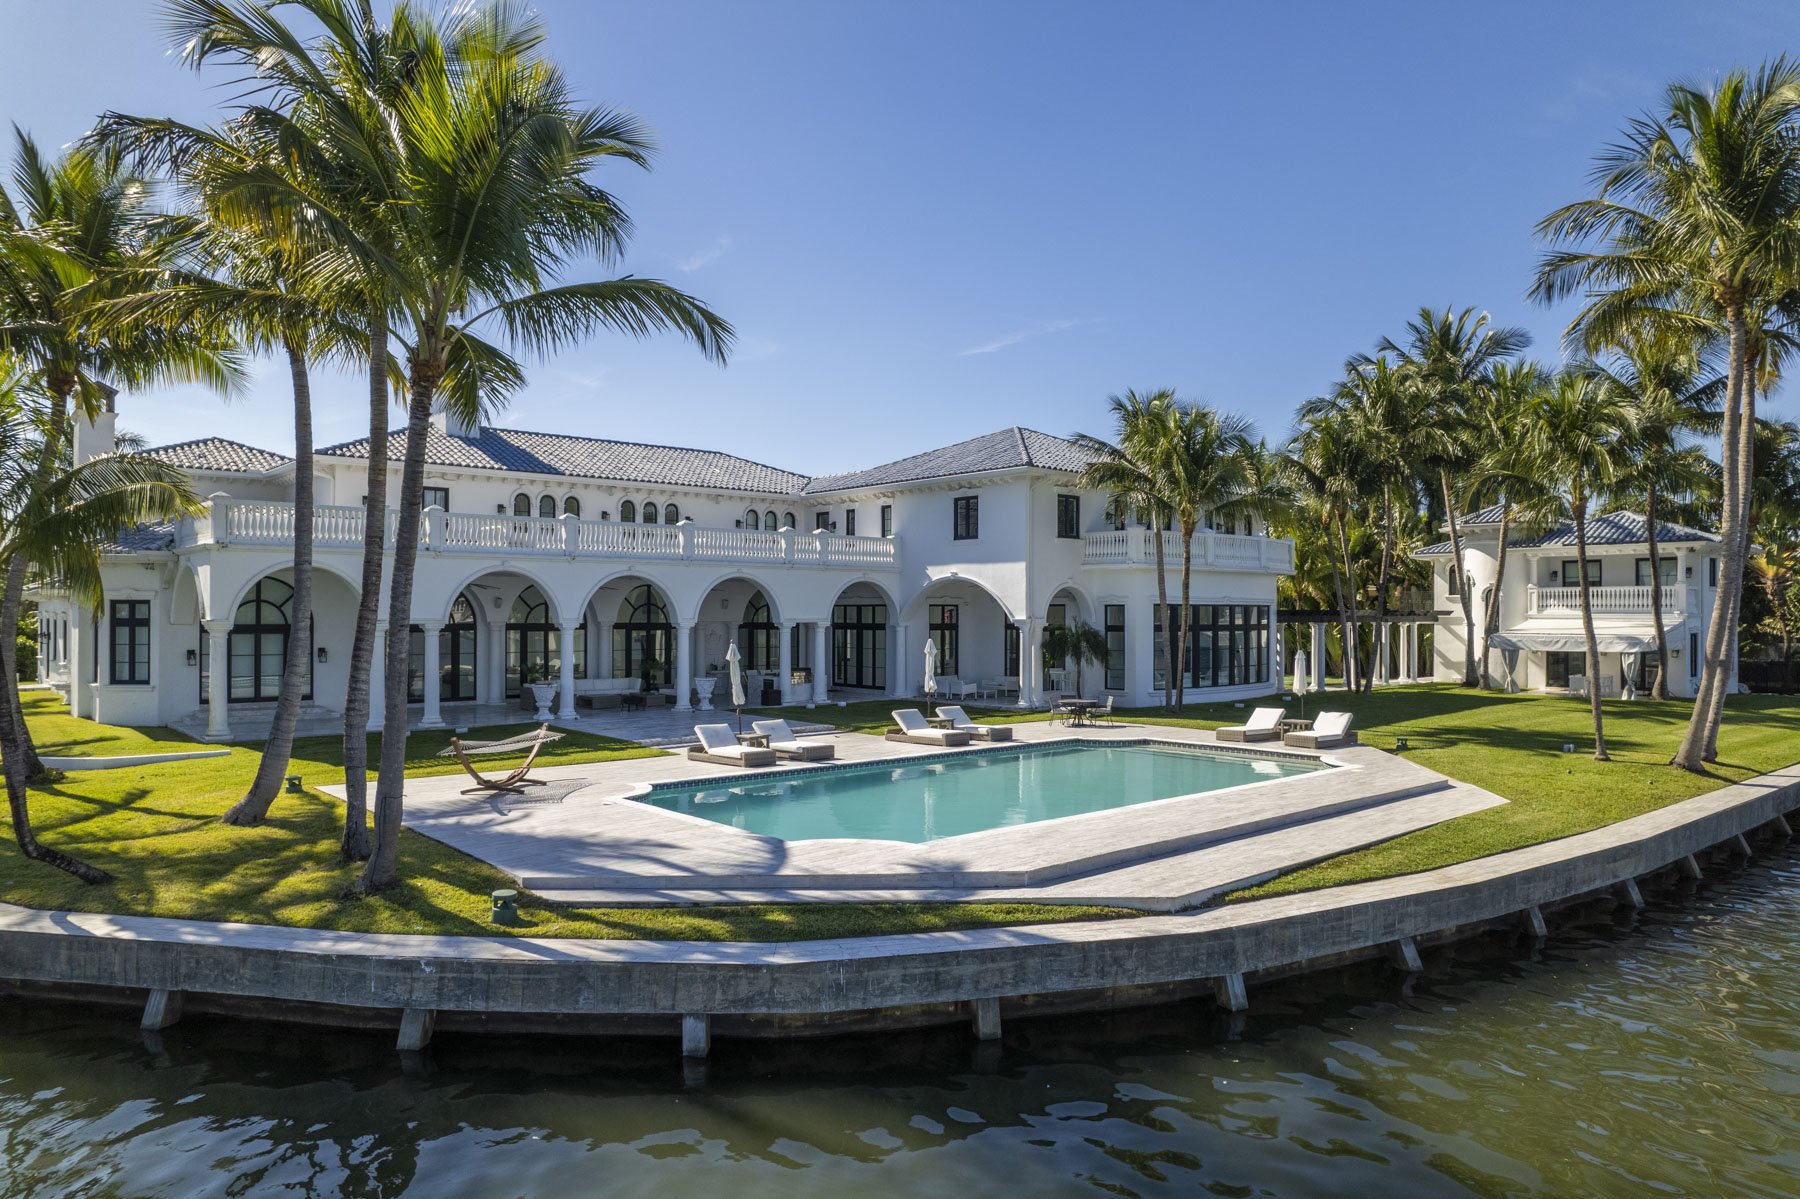 Master Brokers Forum: Check Out This Hollywood Waterfront Estate Asking $16.5 Million 53.jpg